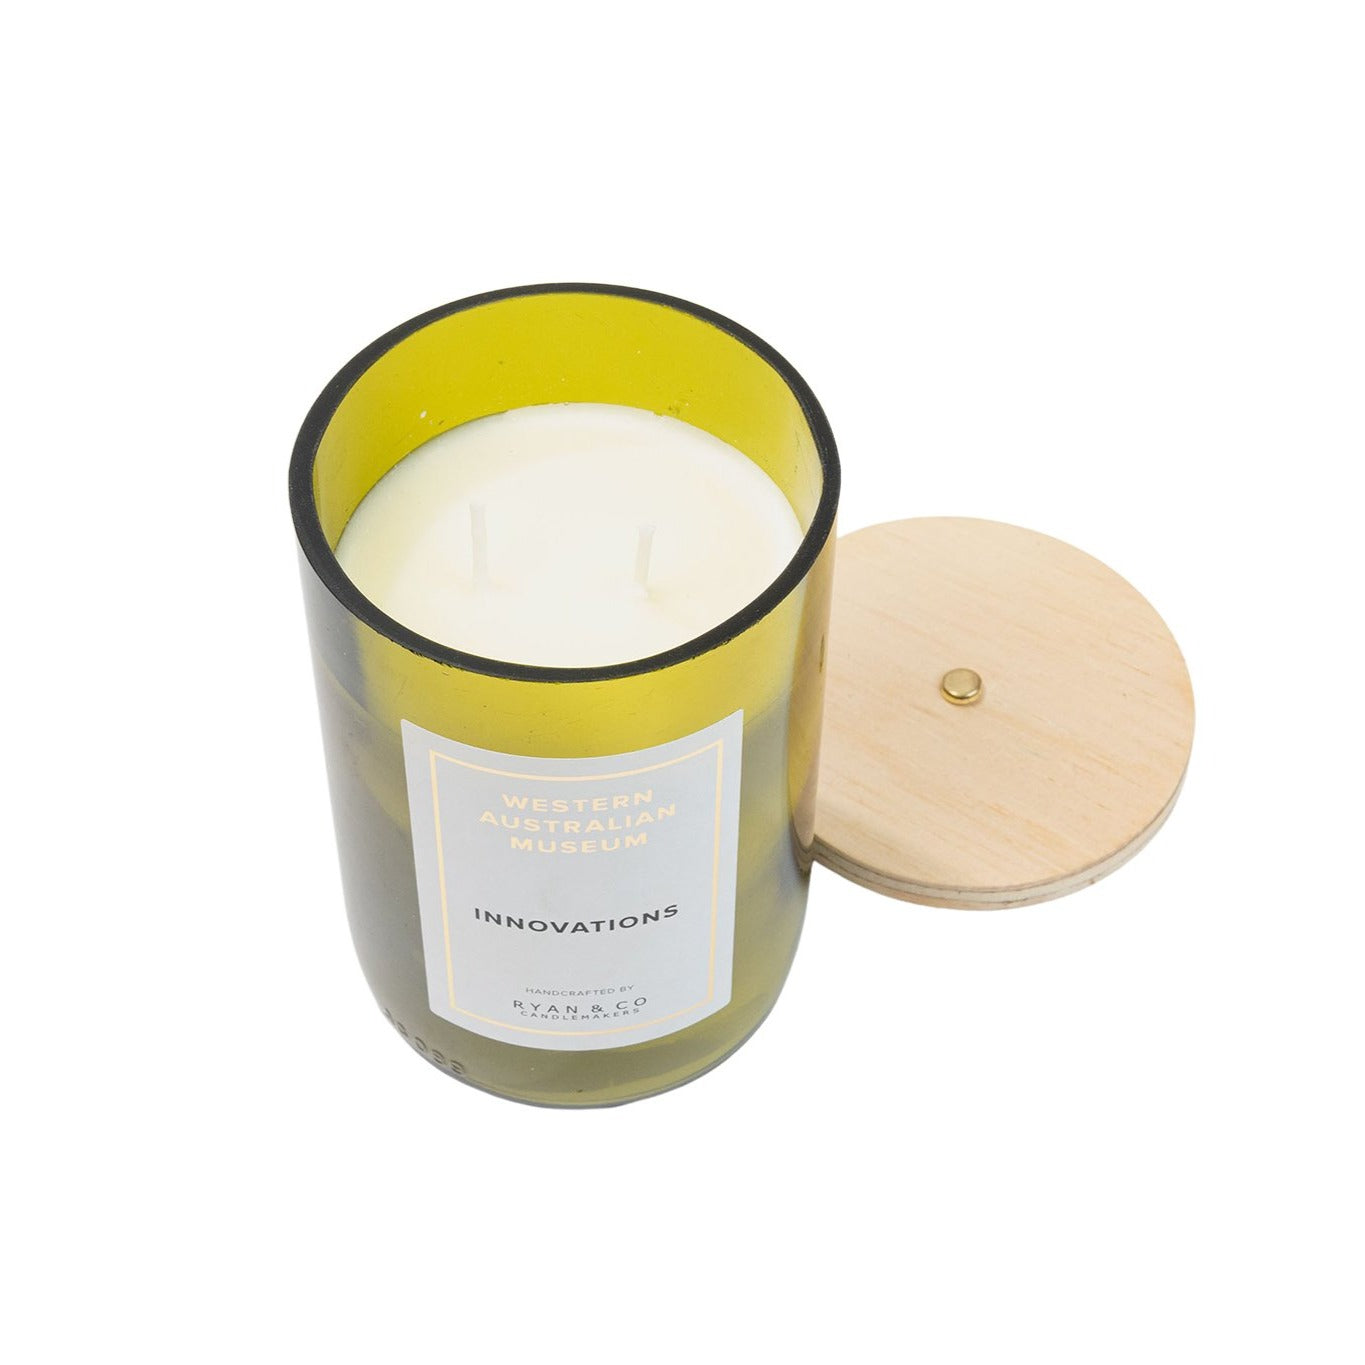 Innovations Candle - Ryan & Co top